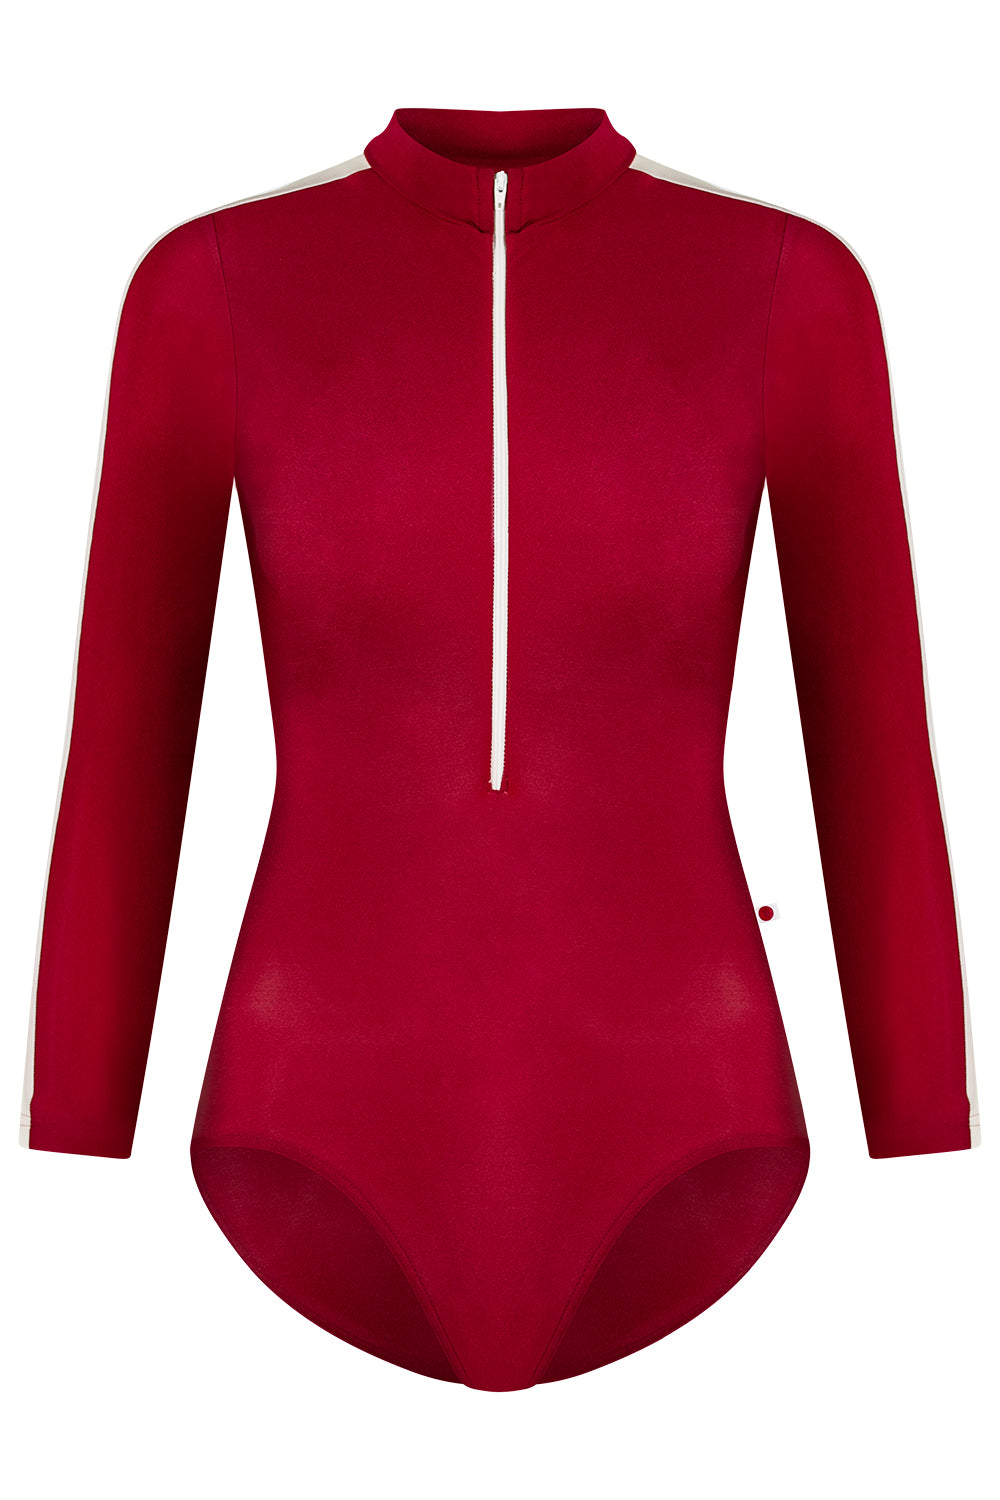 Jessica leotard in N-Berry body color with T-White side stripe and long sleeves